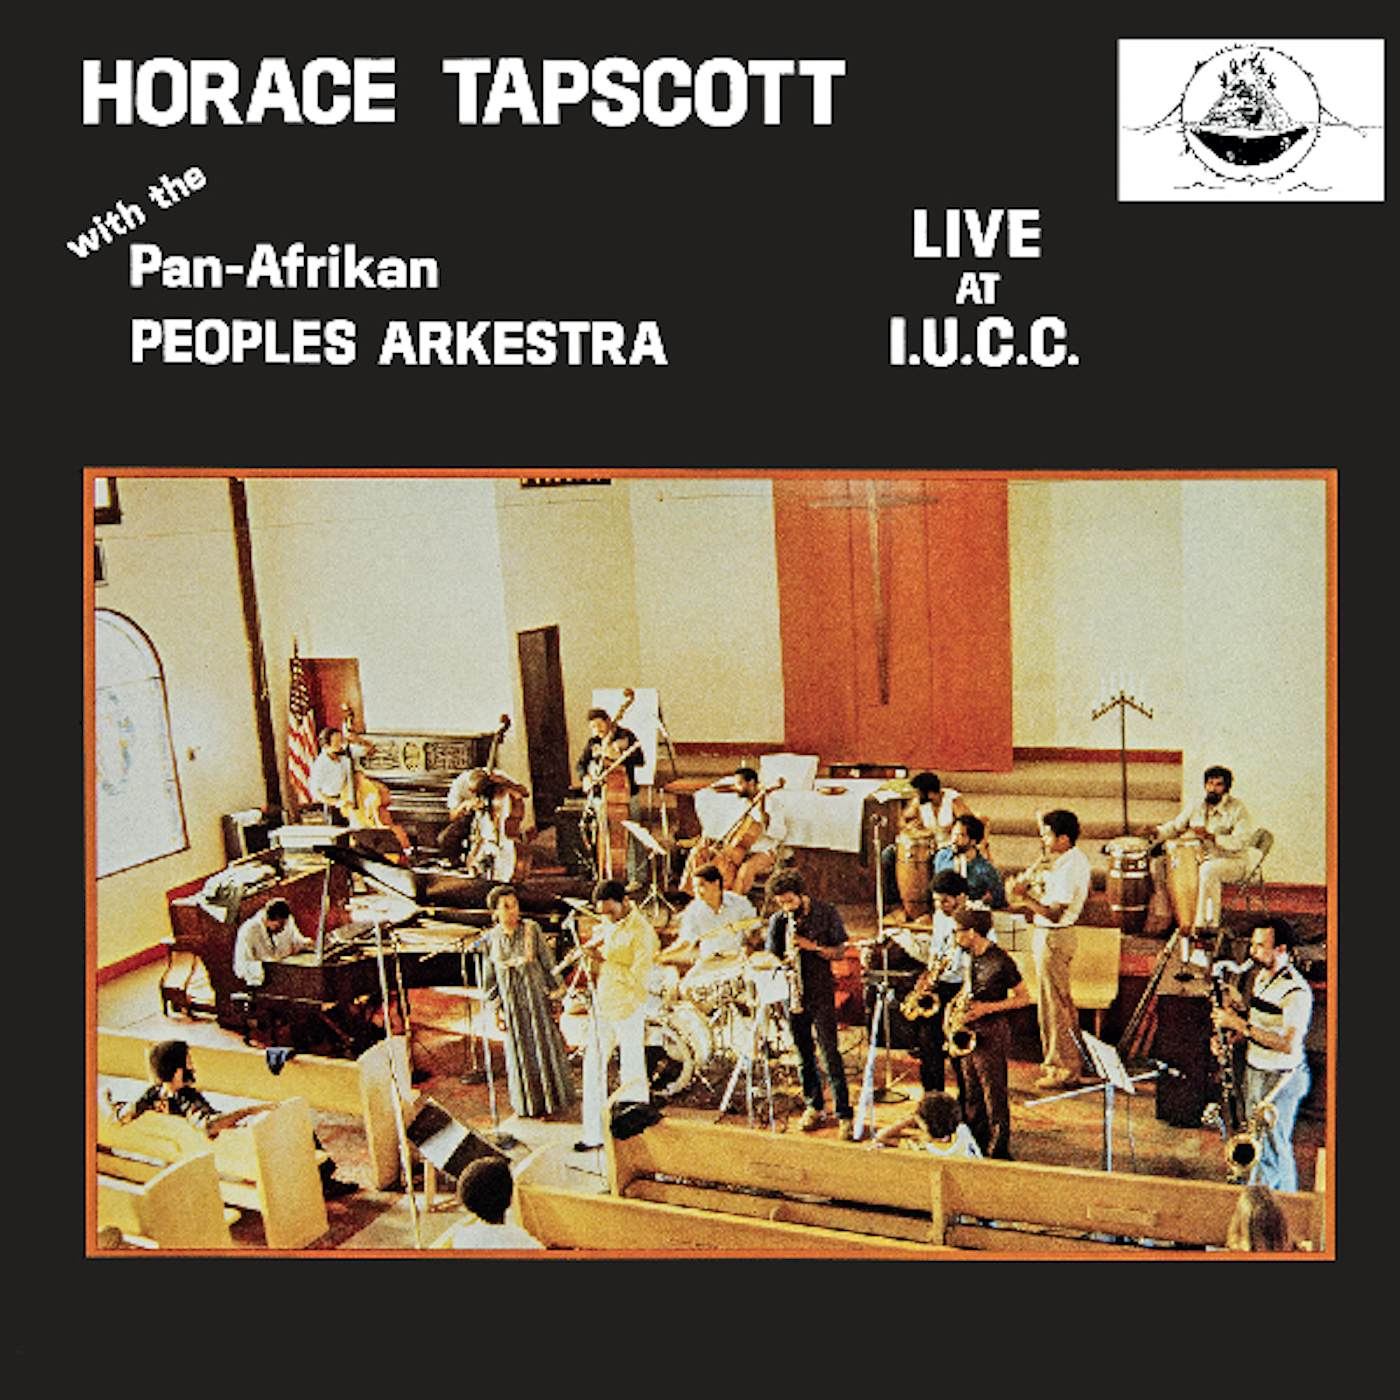 Horace Tapscott with The Pan-Afrikan Peoples Arkestra Live At I.U.C.C. Vinyl Record